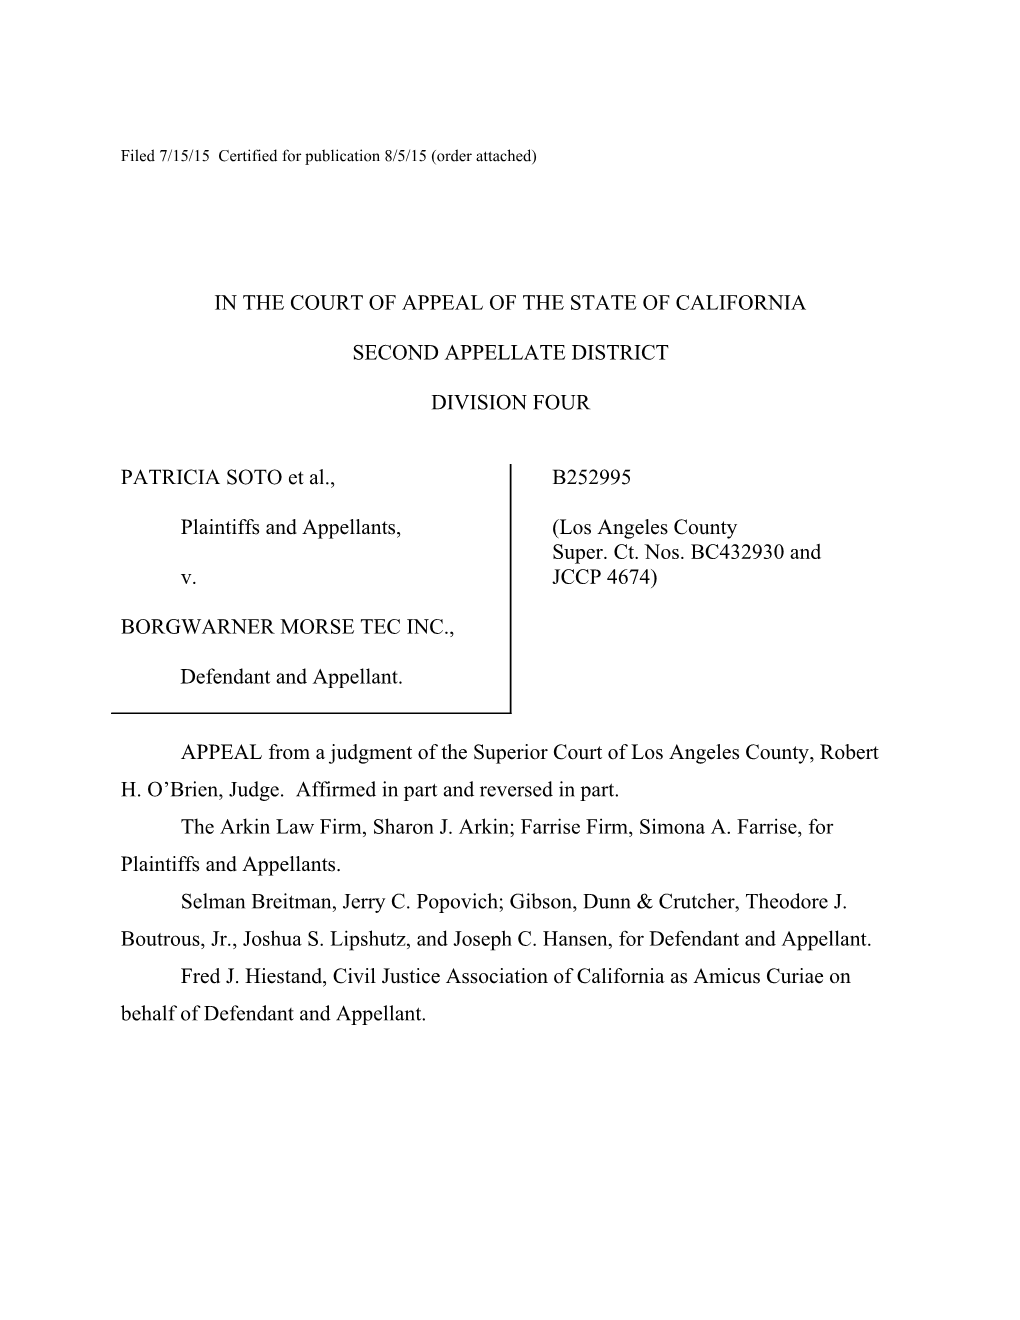 Filed 7/15/15 Certified for Publication 8/5/15 (Order Attached)